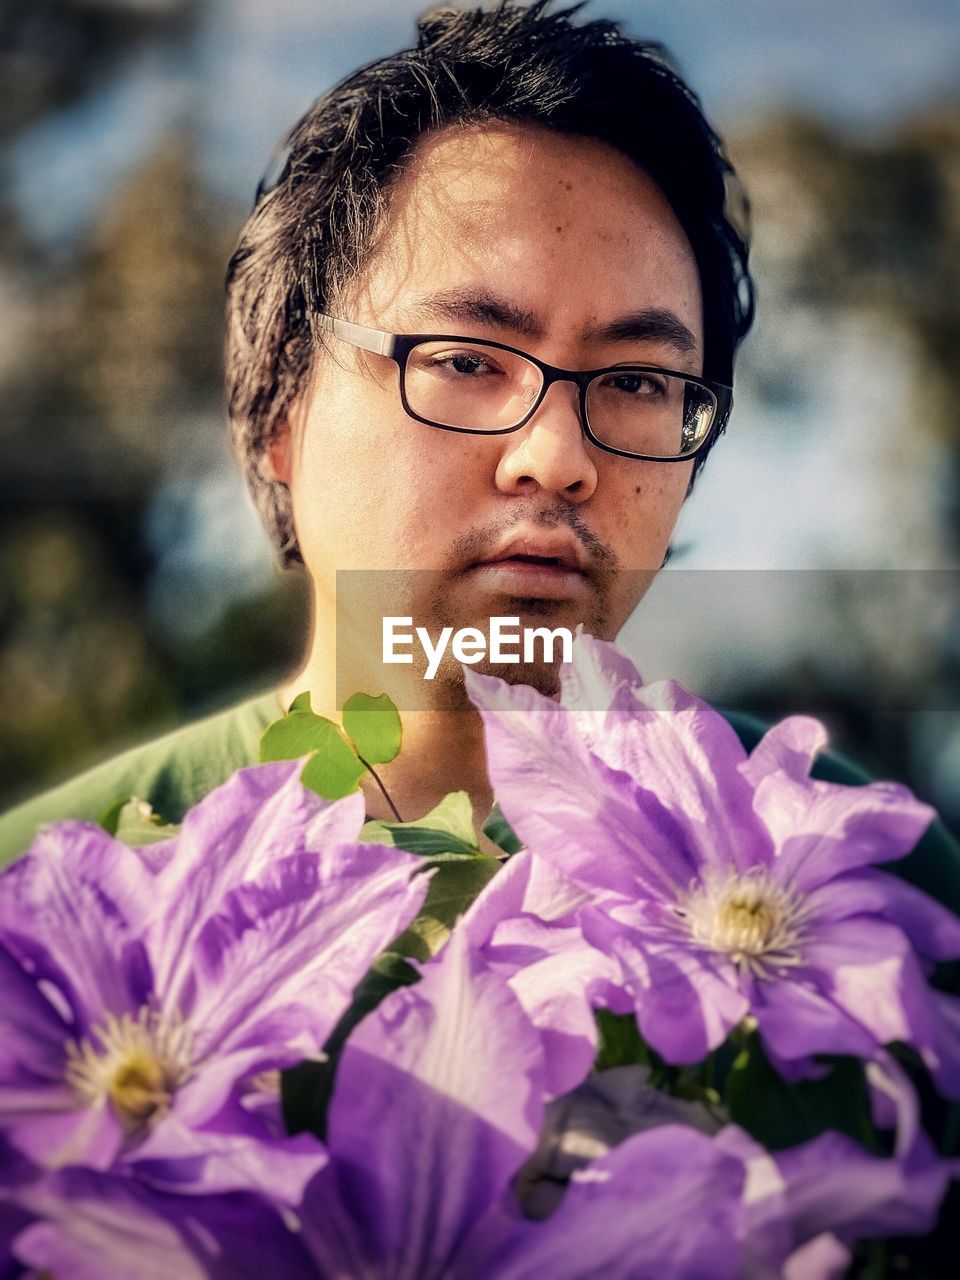 Close-up portrait of young man with large, purple clematis flowers.